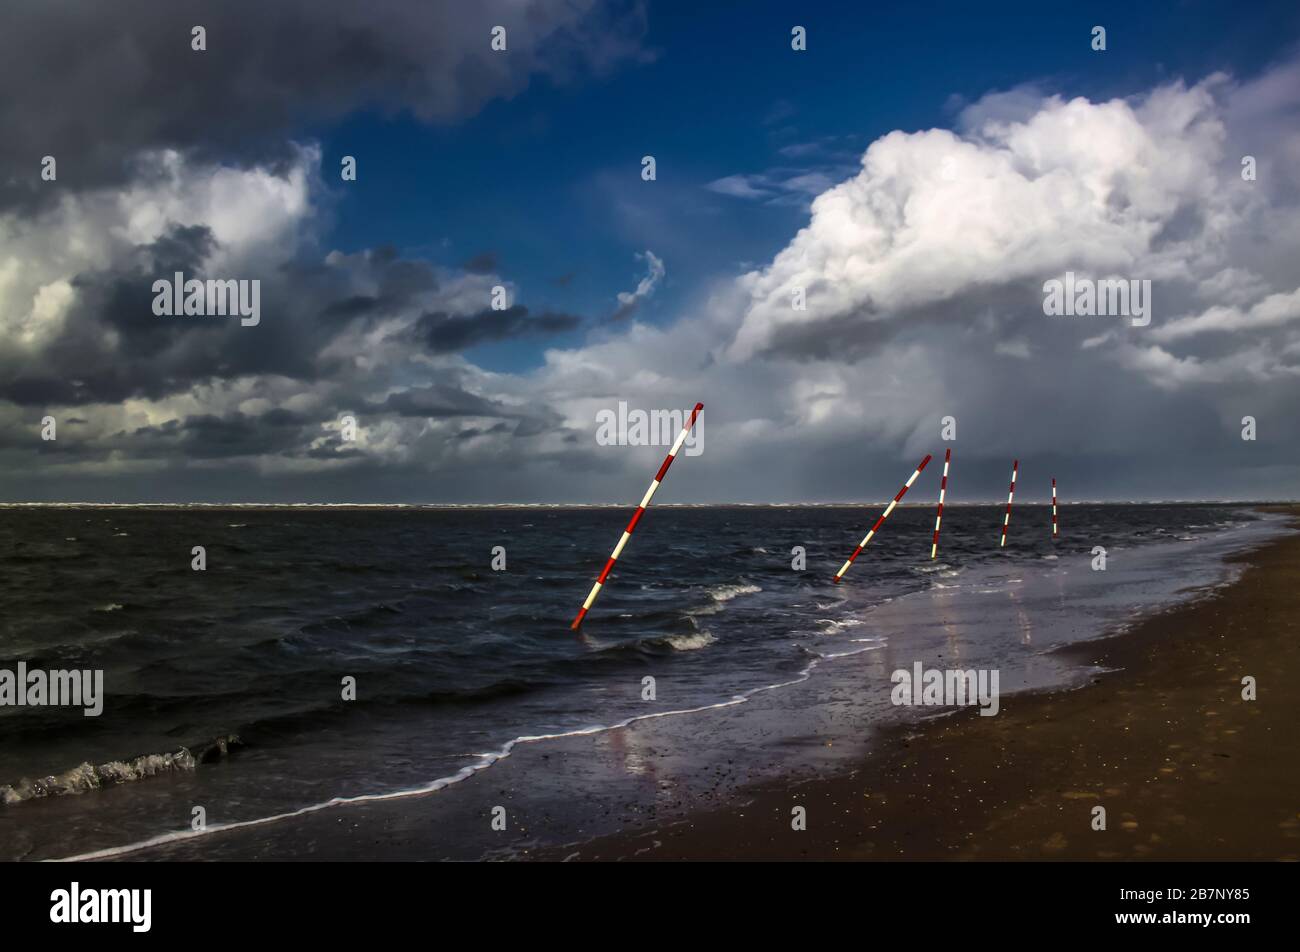 Baltrum, a small island in the North Sea, showed its stormy side here. The first autumn storm in the year. Stock Photo